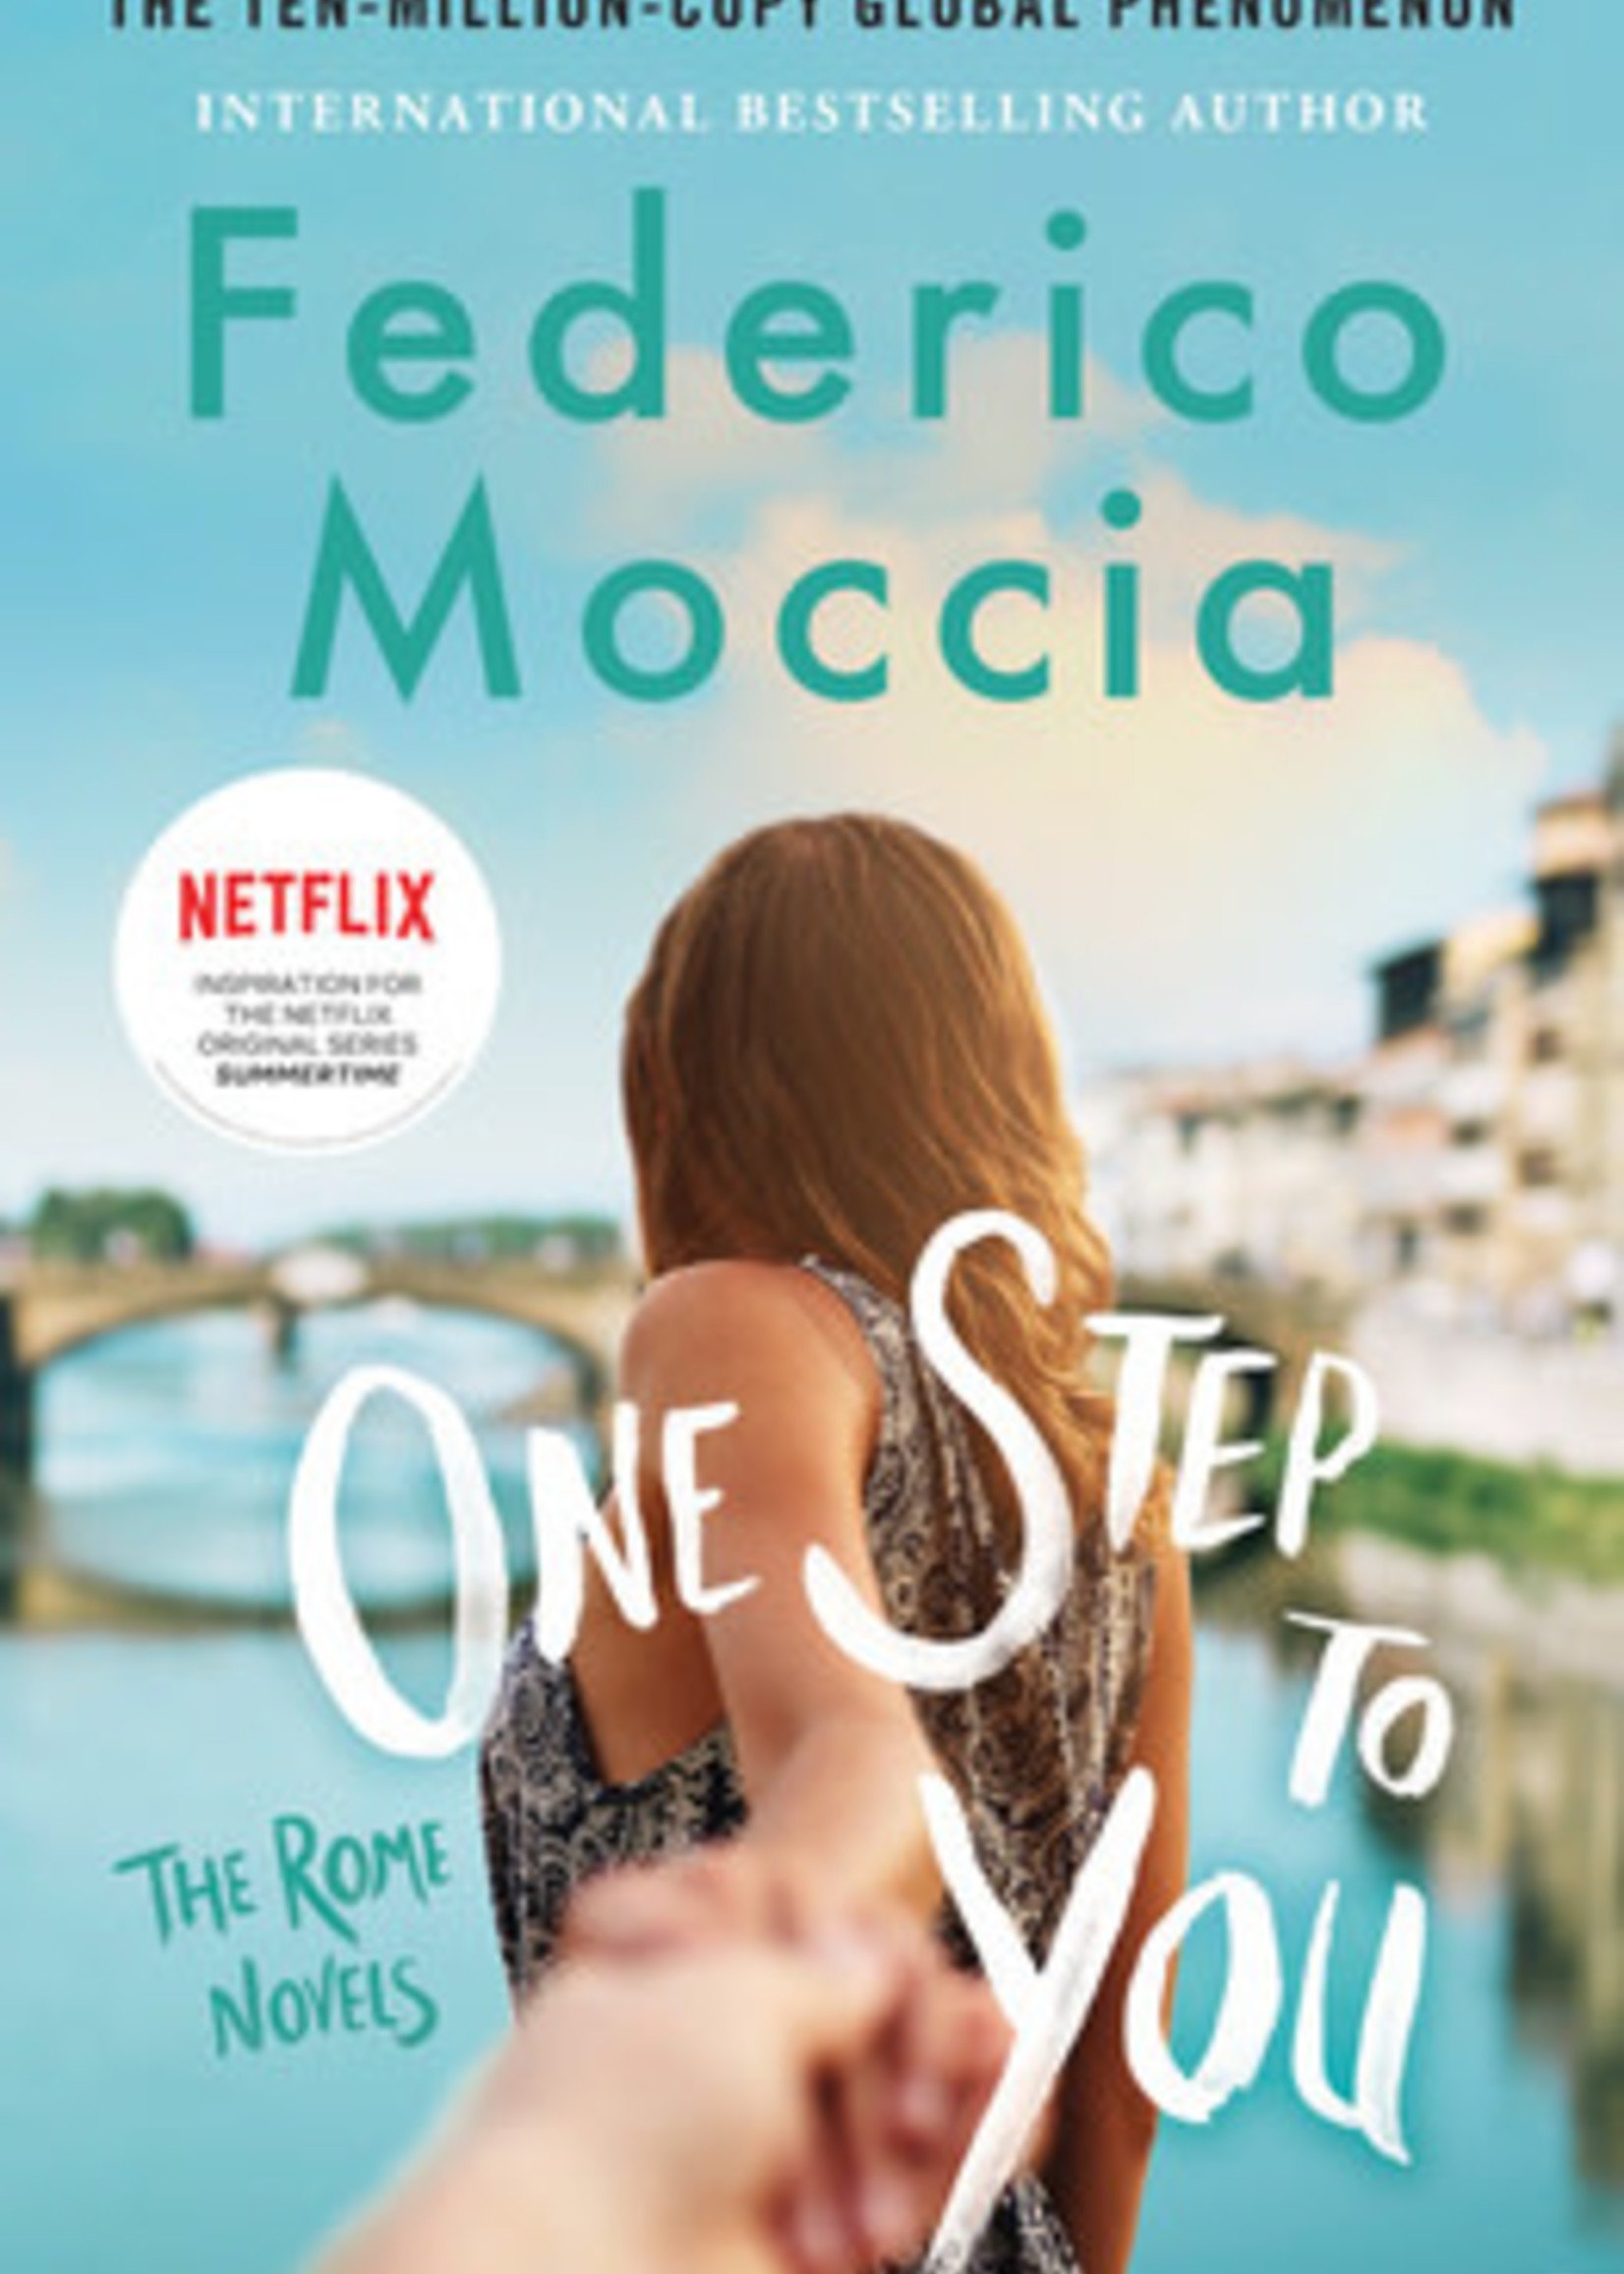 One Step to You (The Rome Novels #1) by Federico Moccia